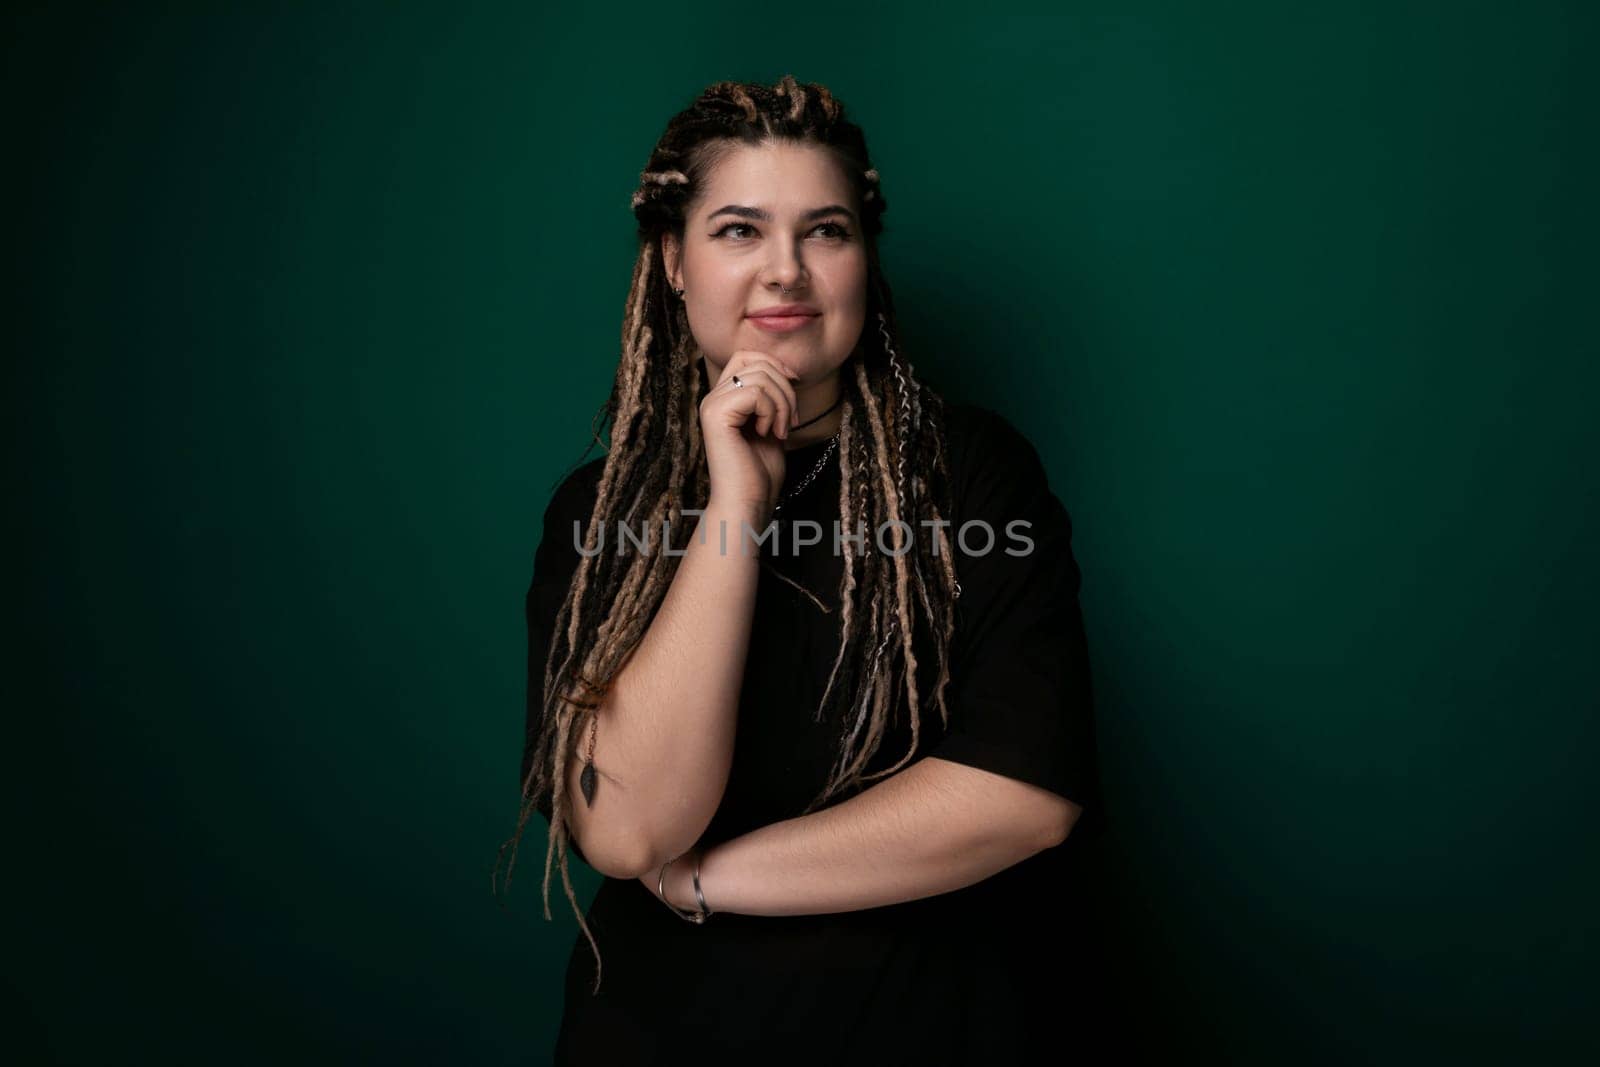 A woman with dreadlocks stands confidently in front of a vibrant green wall. Her unique hairstyle contrasts with the bold color behind her, creating a striking visual composition.